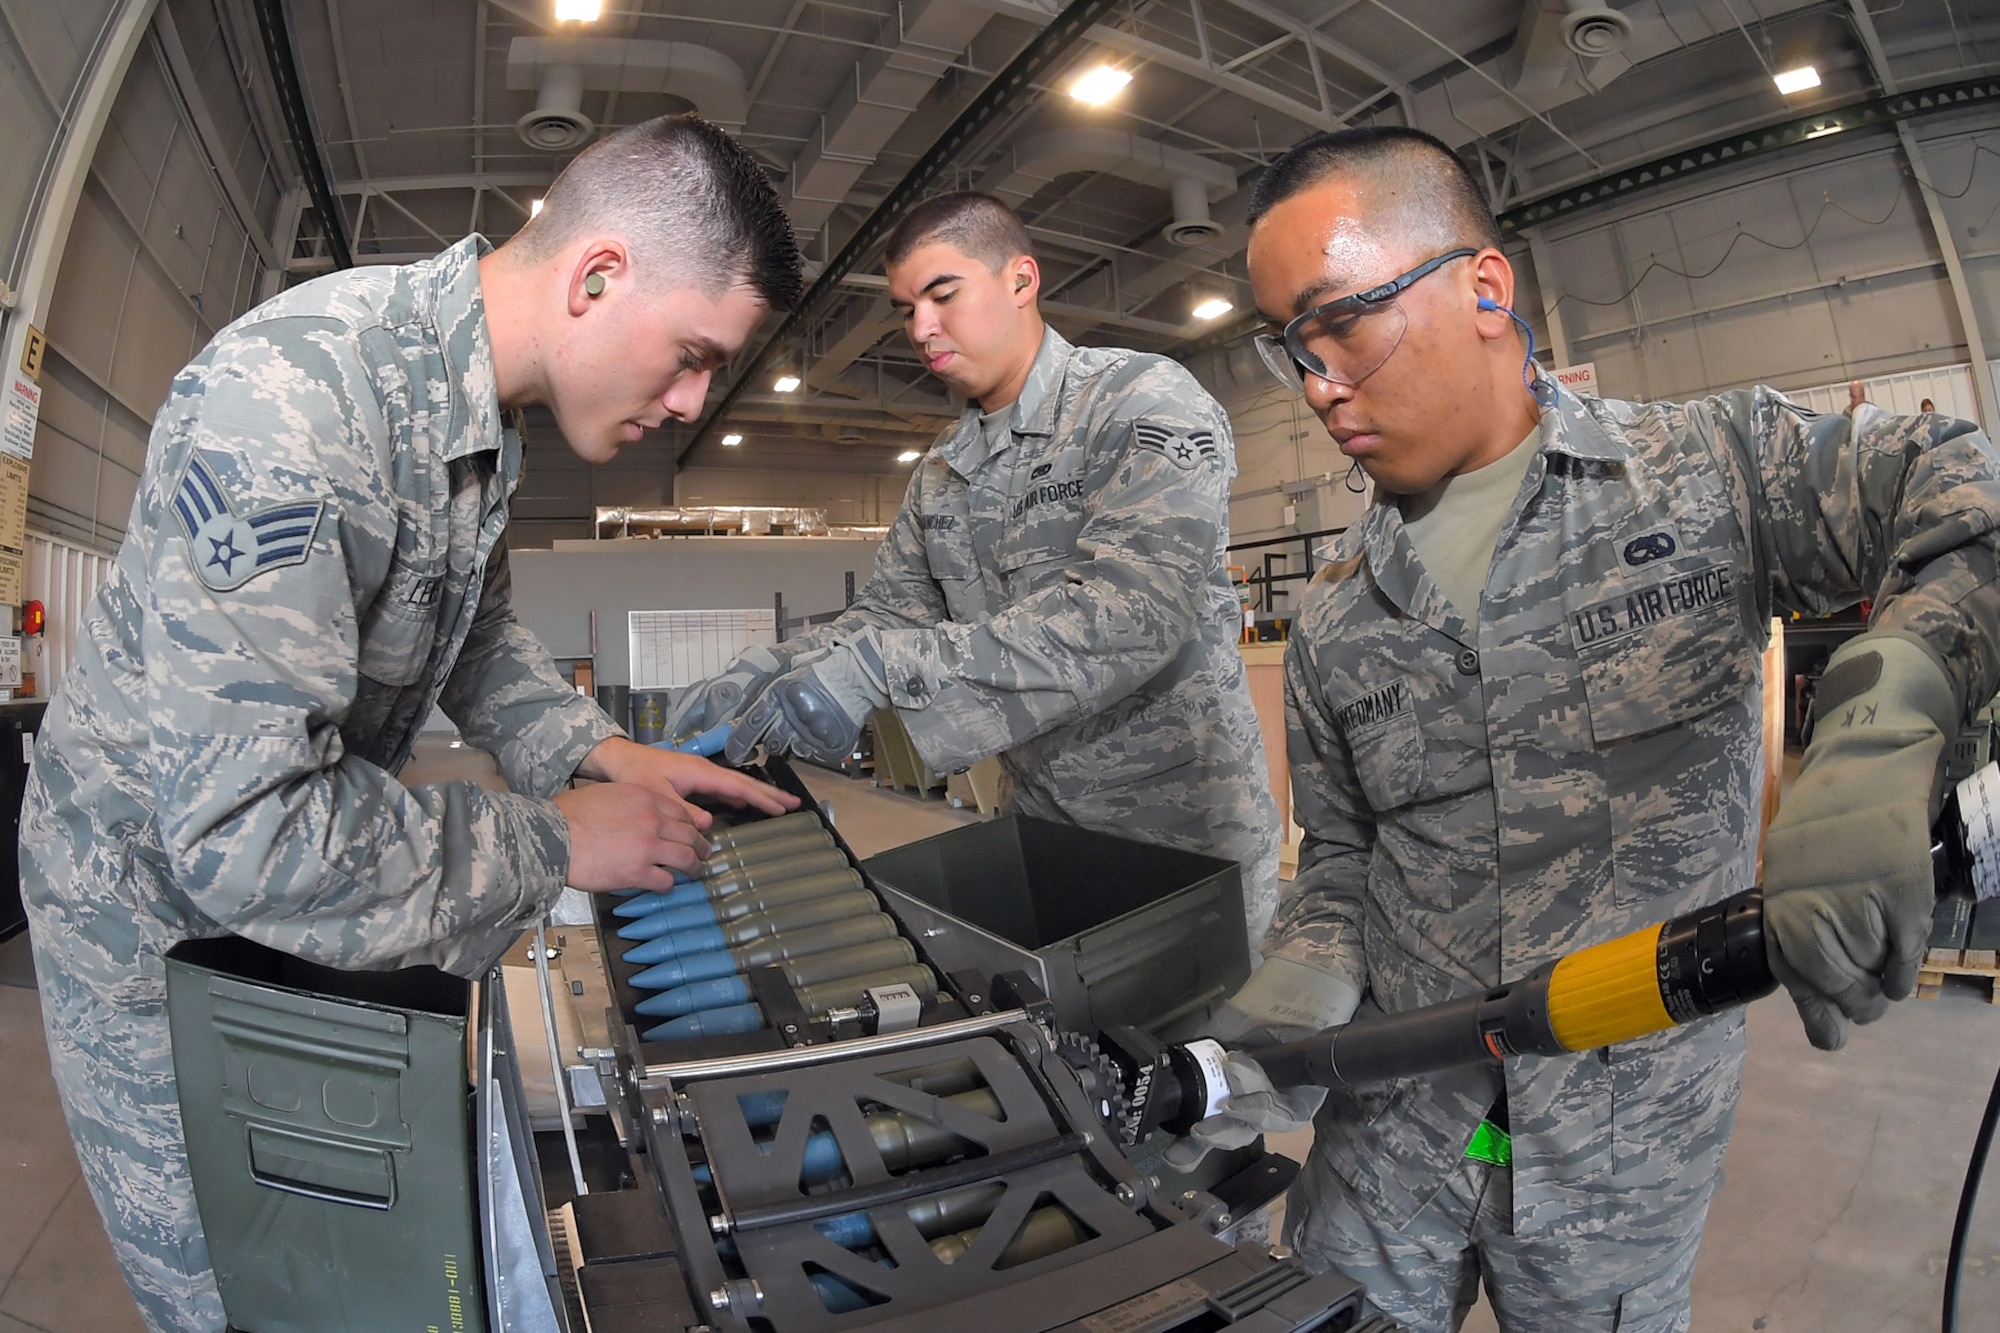 Senior Airman Bradley Lewis, Senior Airman Nicholas Sanchez, and Airman 1st Class James Khamkeomany, 388th Maintenance Squadron, load 25 mm target rounds into F-35 magazines August 8, 2018, Hill Air Force Base, Utah. The training was in preparation for the first operational loading of the F-35A cannon. (U.S. Air Force photo by Todd Cromar)